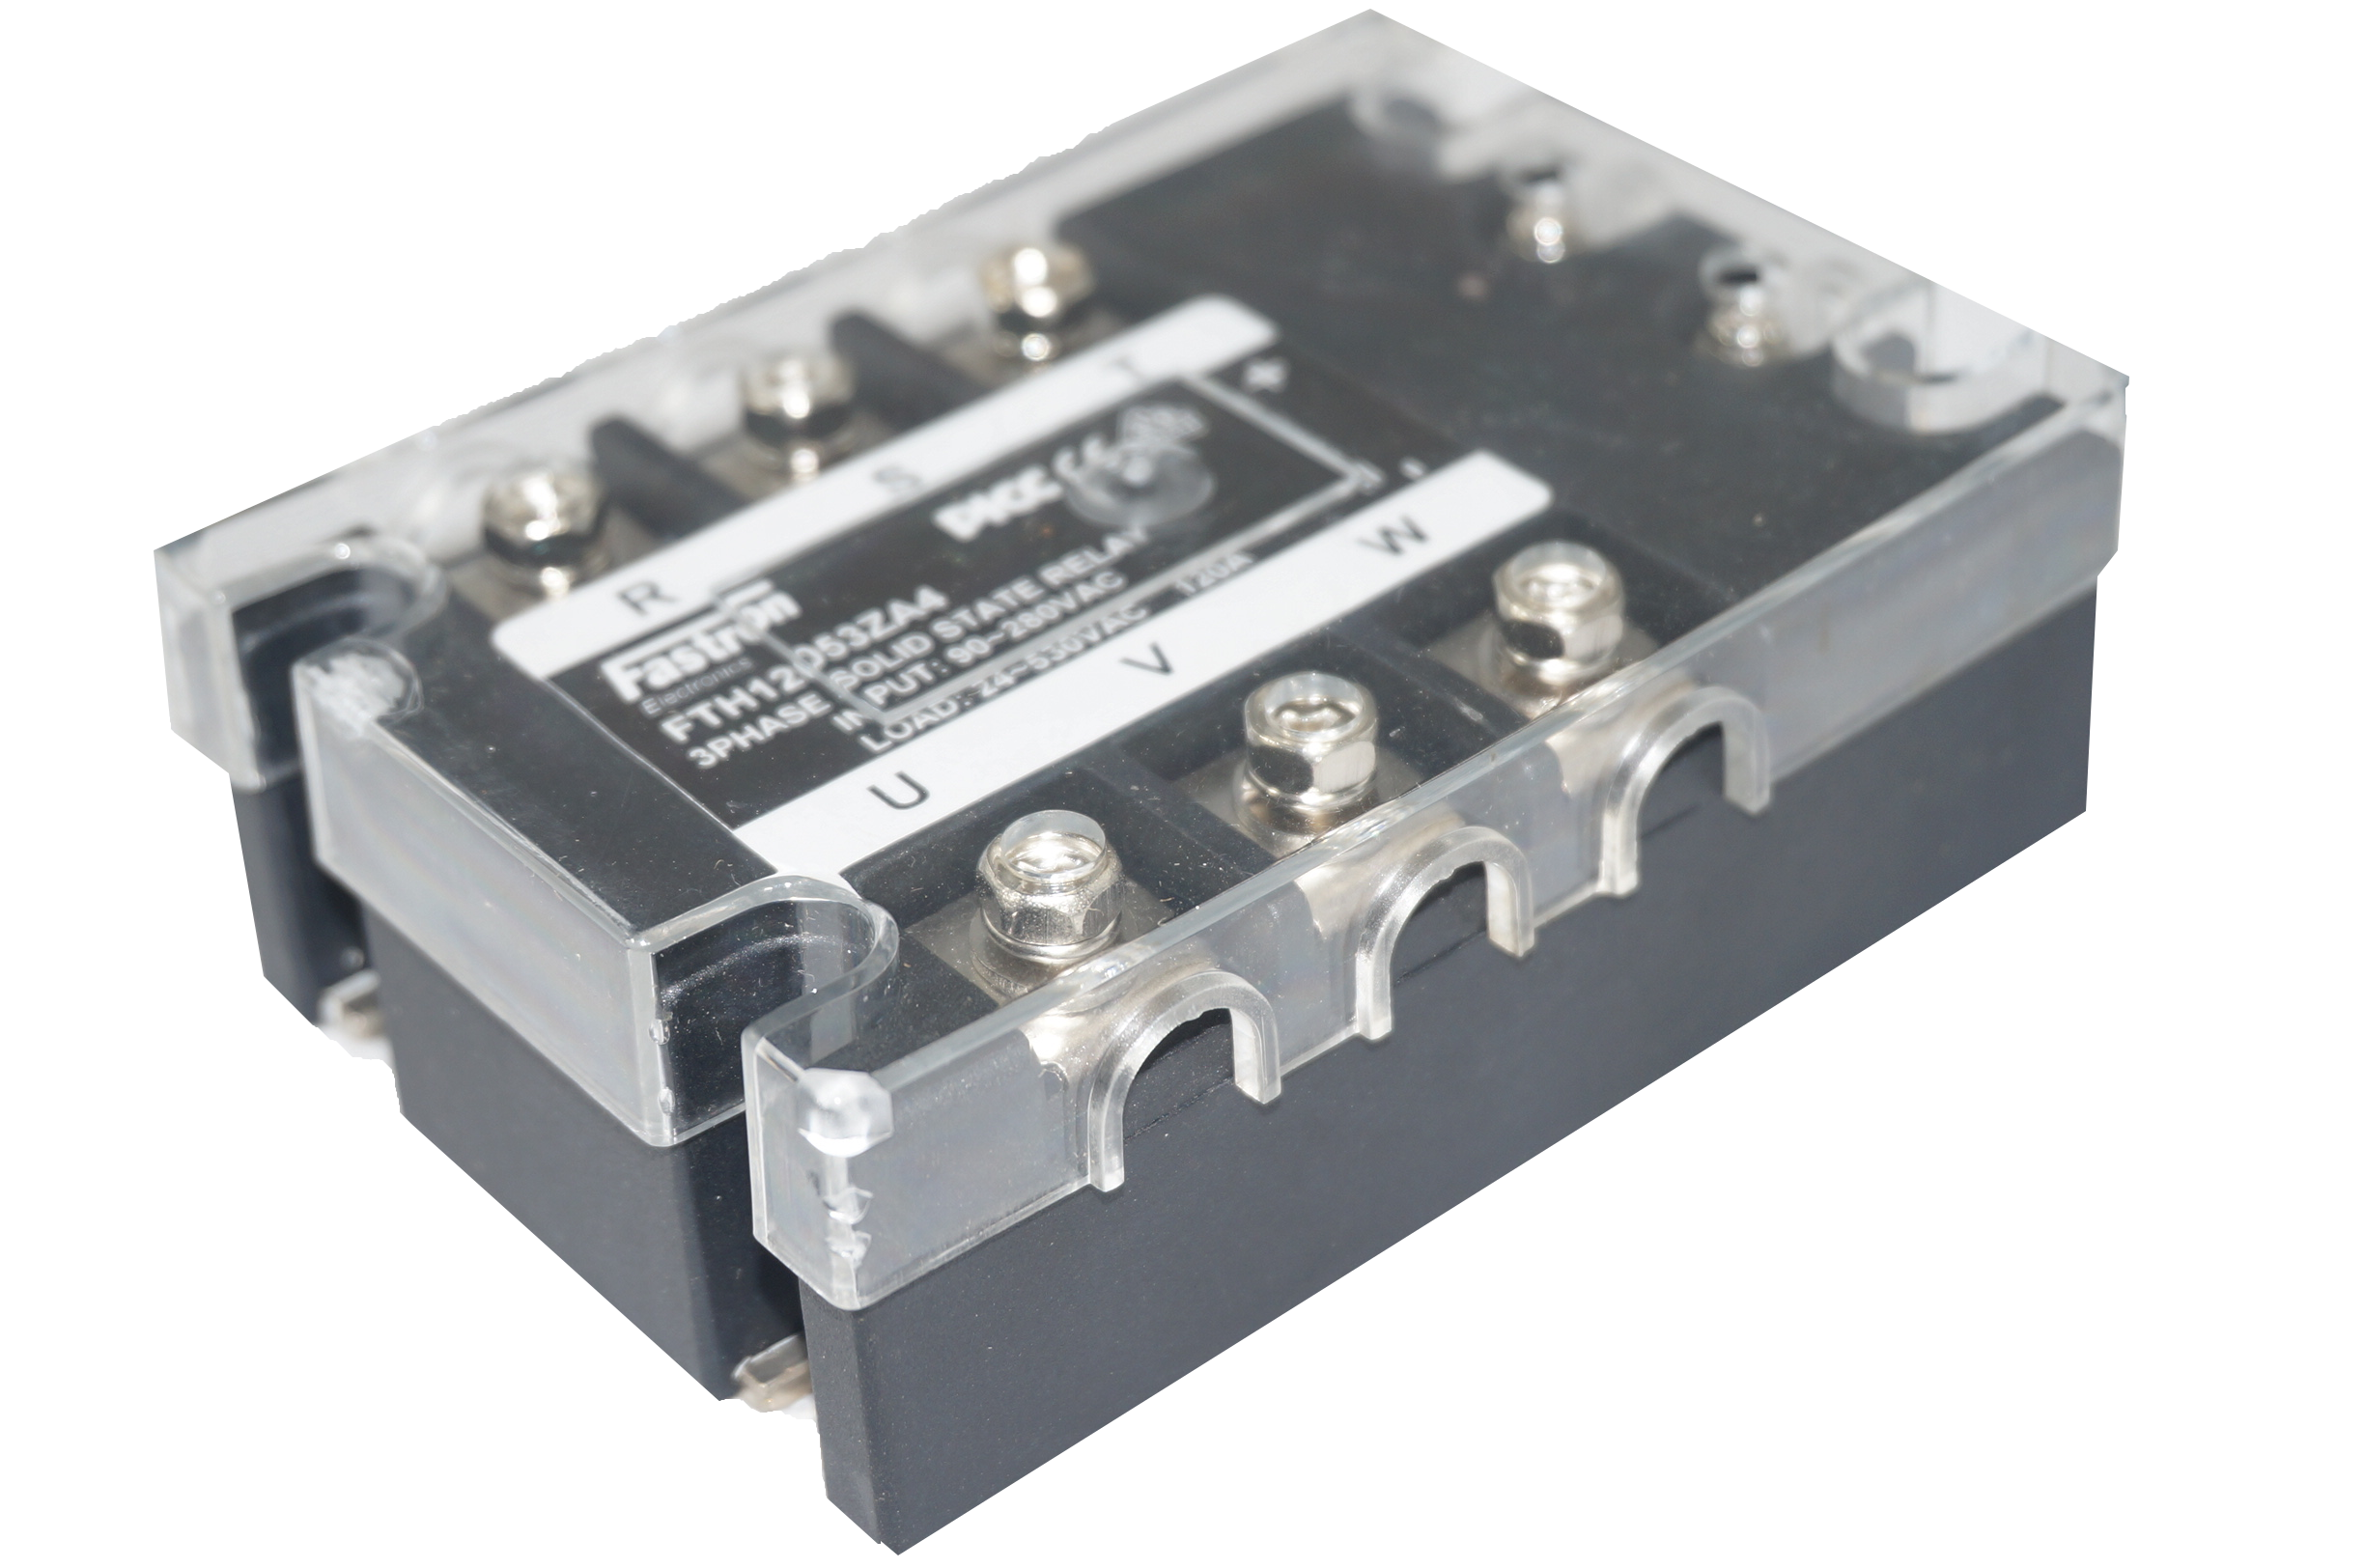 FTH2553ZD3, Solid State Relay, 3 Phase 3-32VDC Control, 25A, 70-530VAC Load, with IP20 Cover